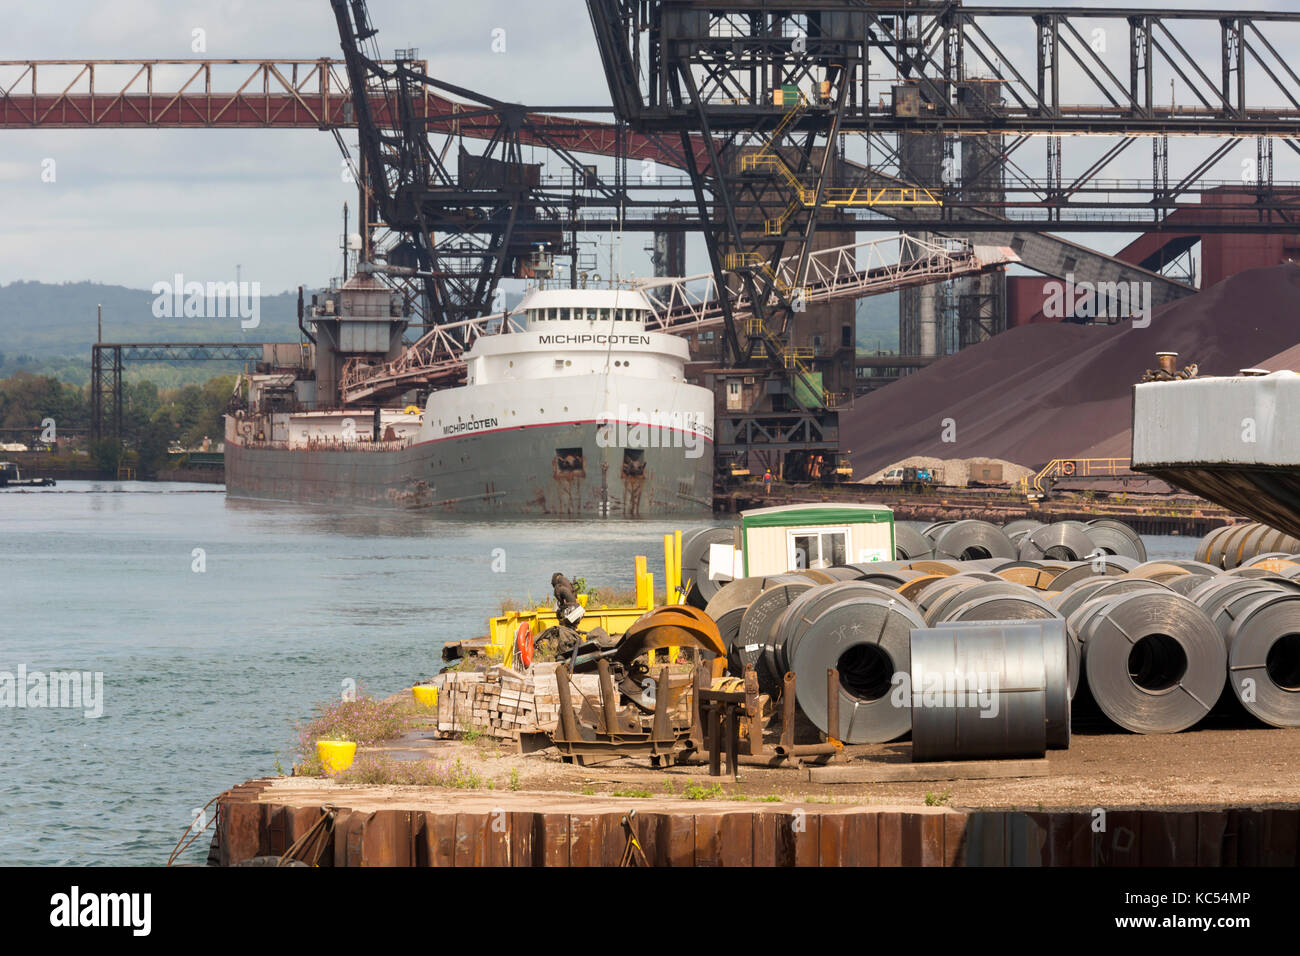 Sault Ste. Marie, Ontario Canada - Steel rolls on the dock at the Algoma steel mill on the shore of the St. Mary's River. Down the dock, the bulk carg Stock Photo